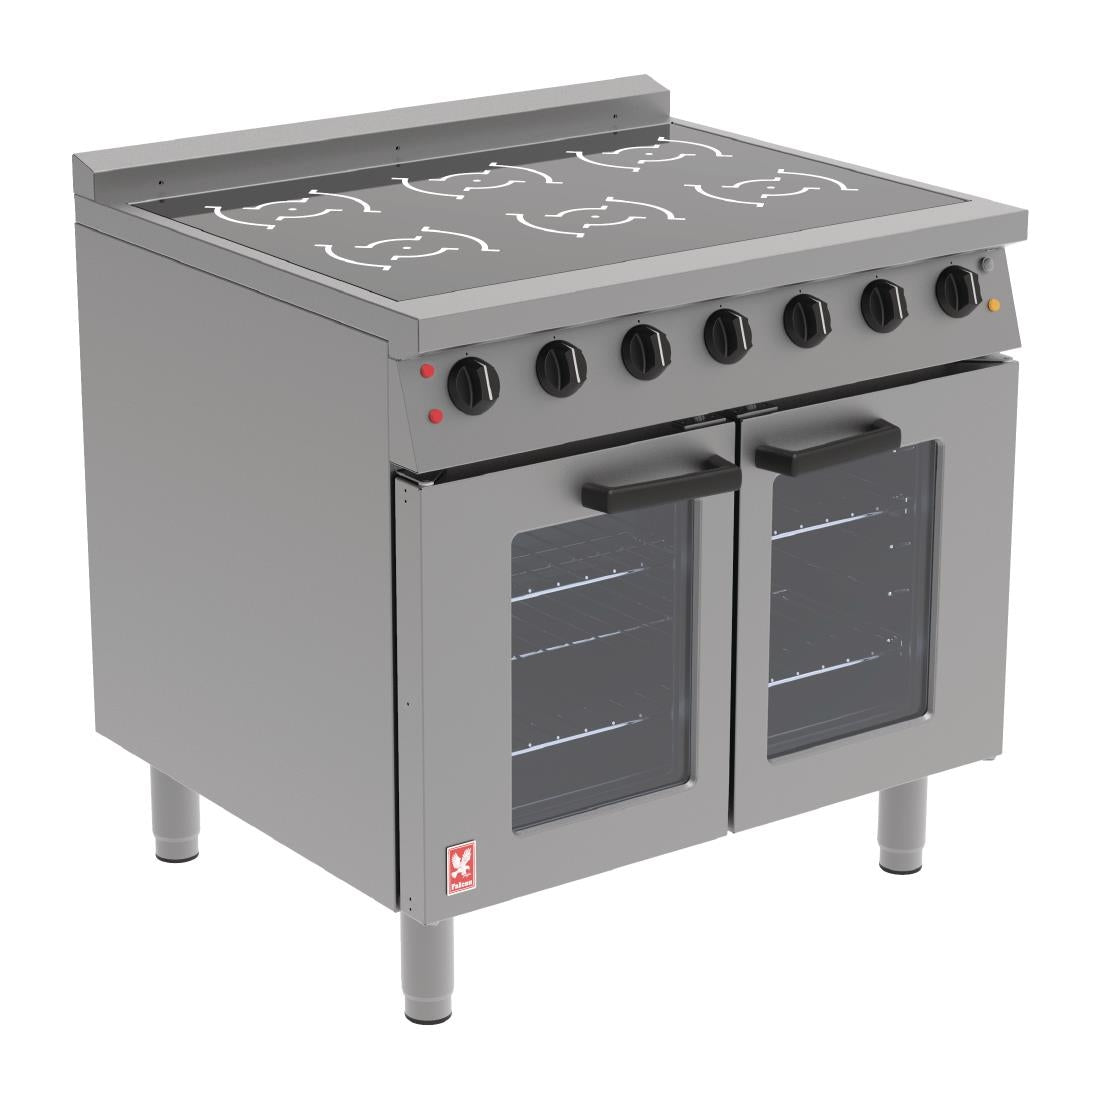 FS043 Falcon Dominator One Series 6 Zone Induction Range E161i JD Catering Equipment Solutions Ltd